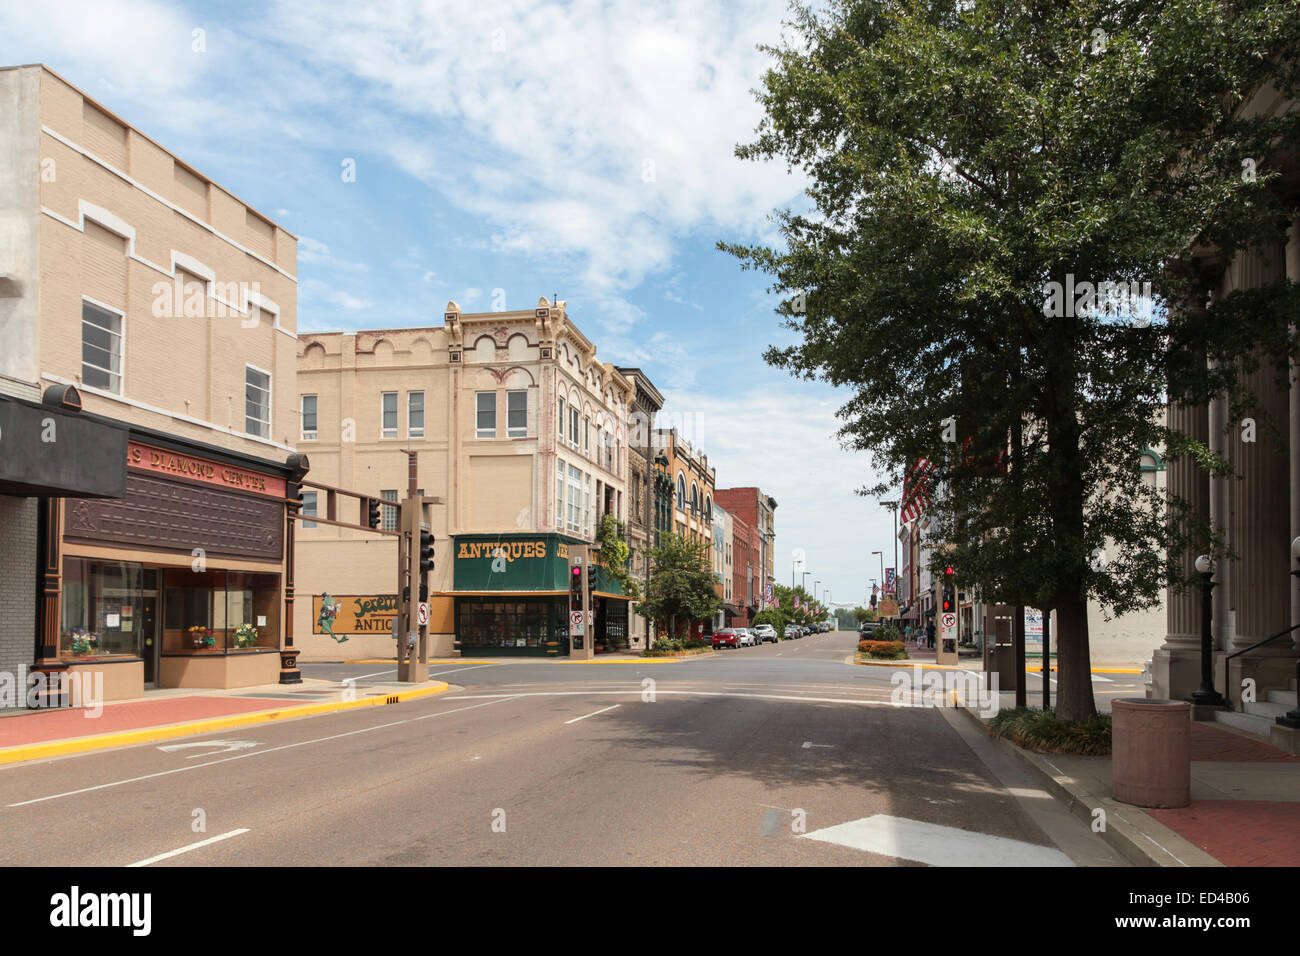 Old frontages and buildings in Paducah, Kentucky, USA Stock Photo